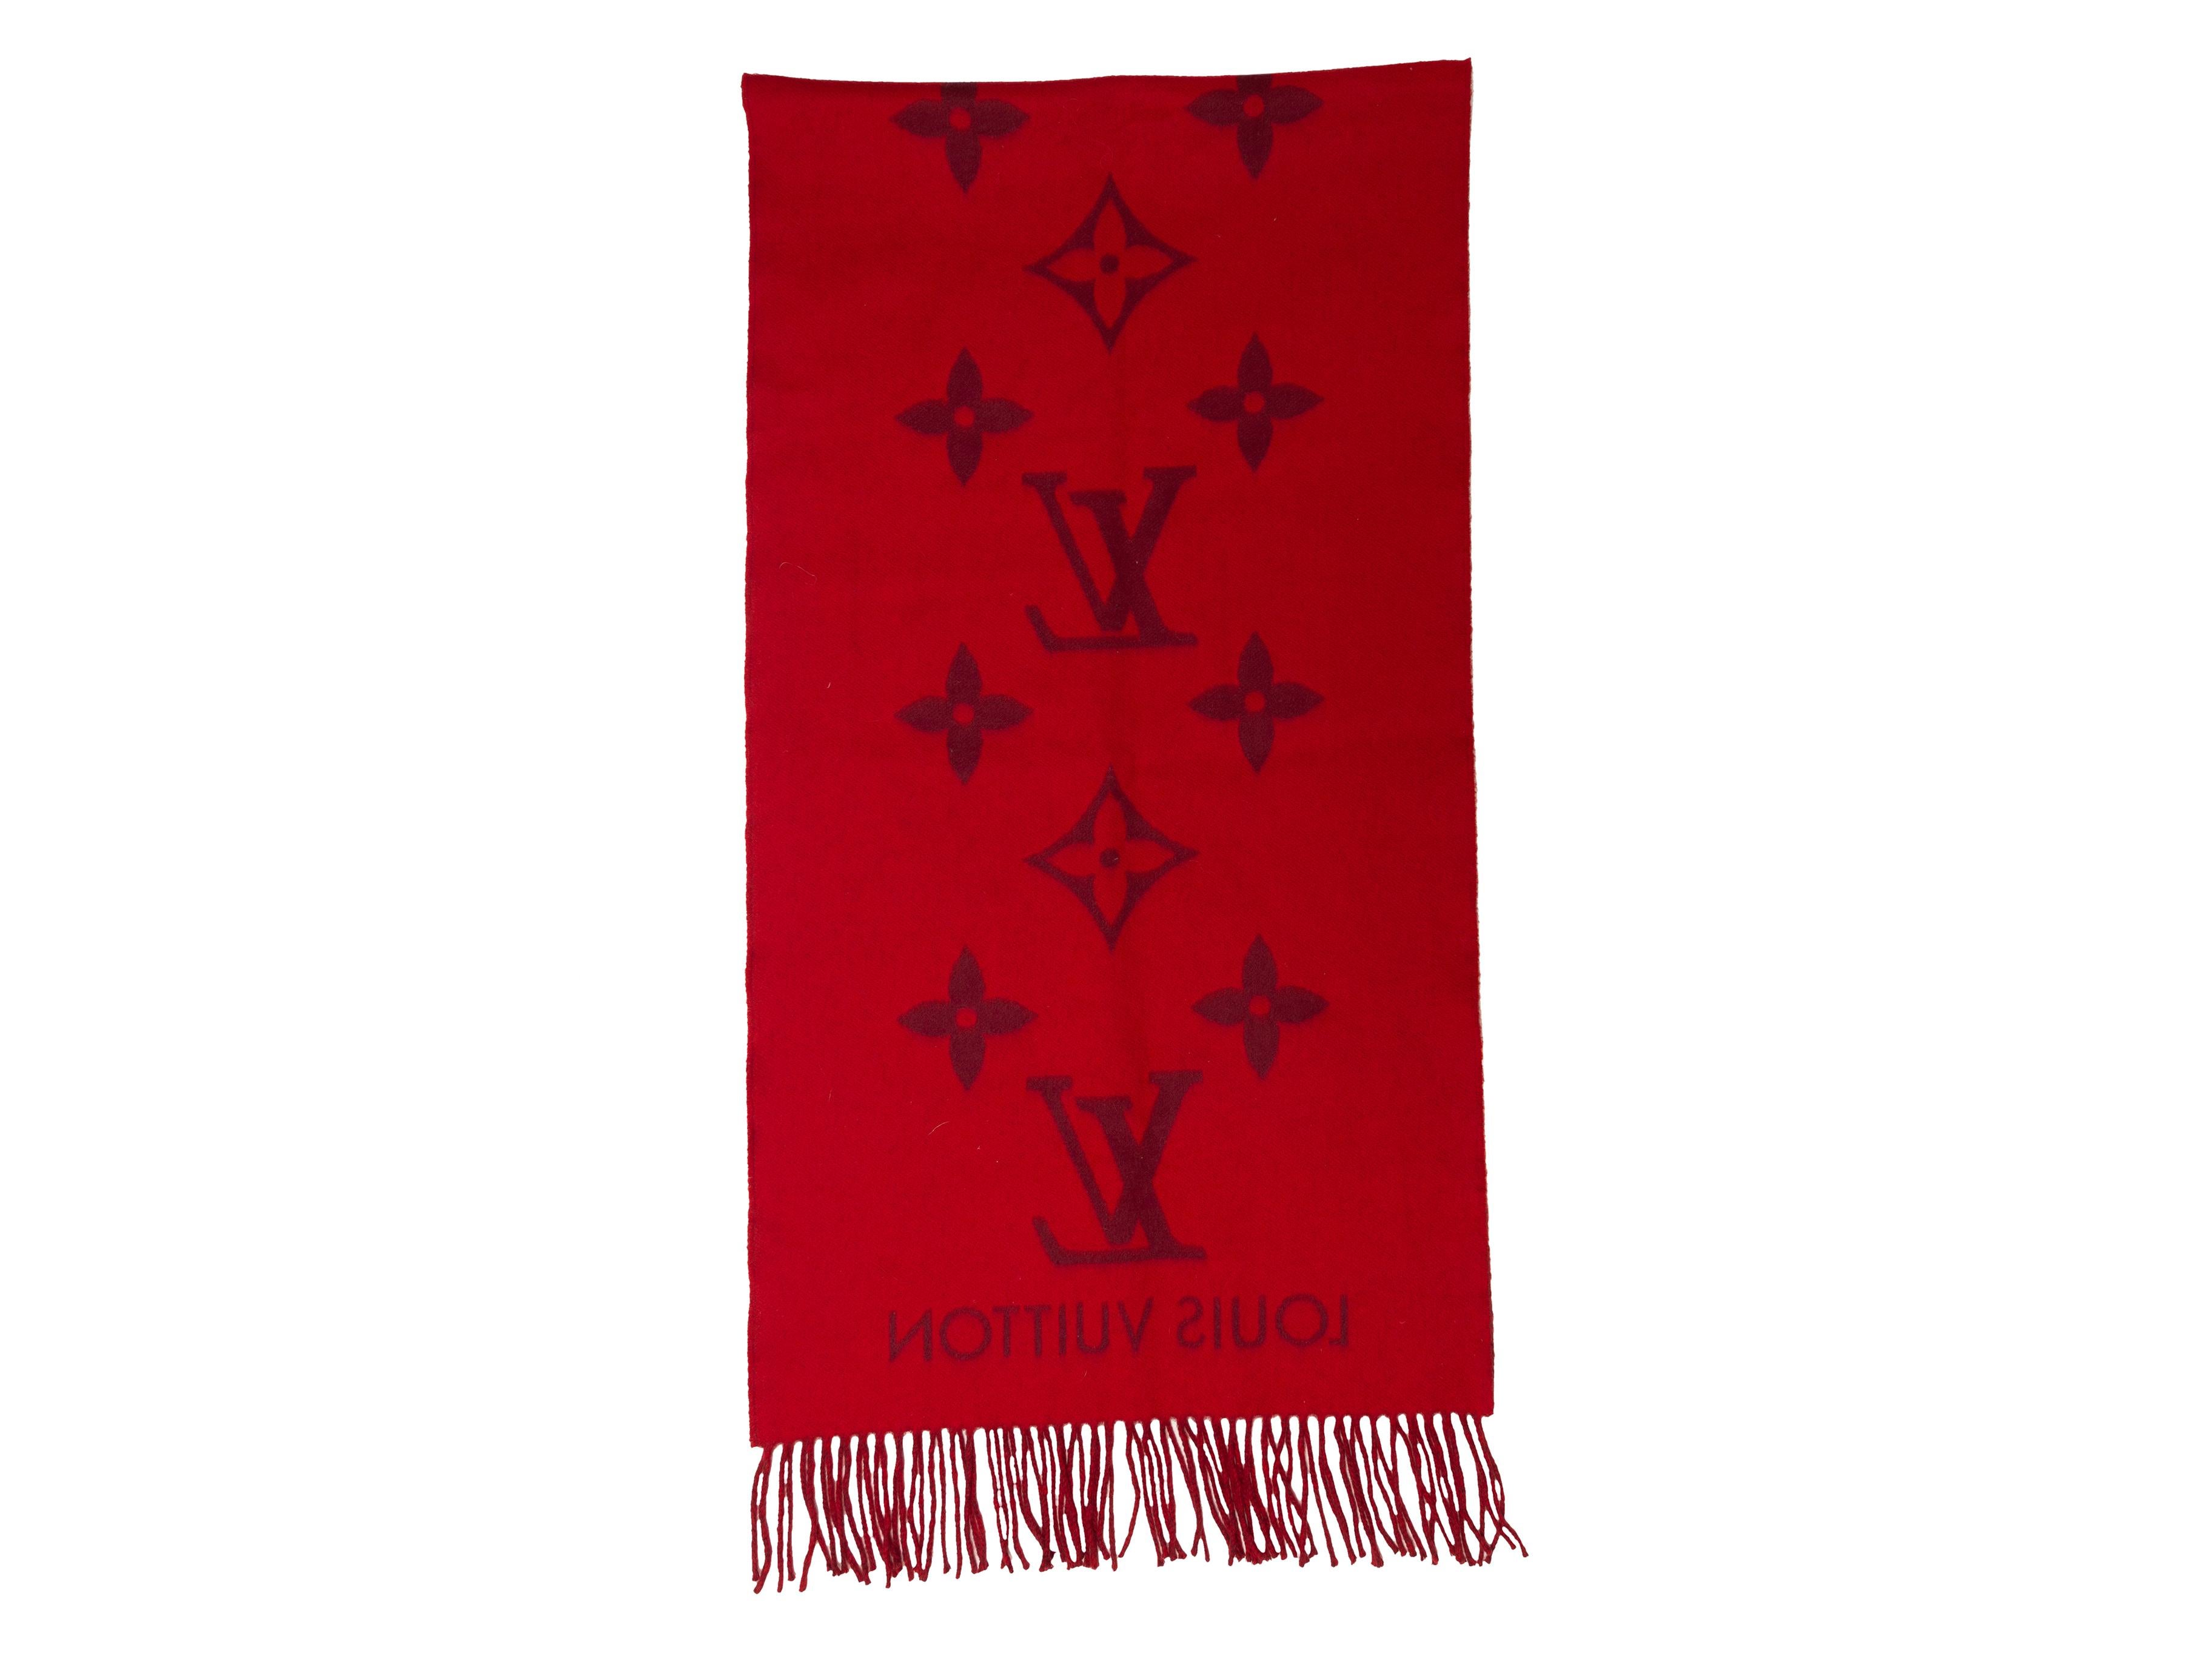 Product details: Red and burgundy cashmere scarf by Louis Vuitton. Intarsia logo throughout. Fringe trim at ends. 66